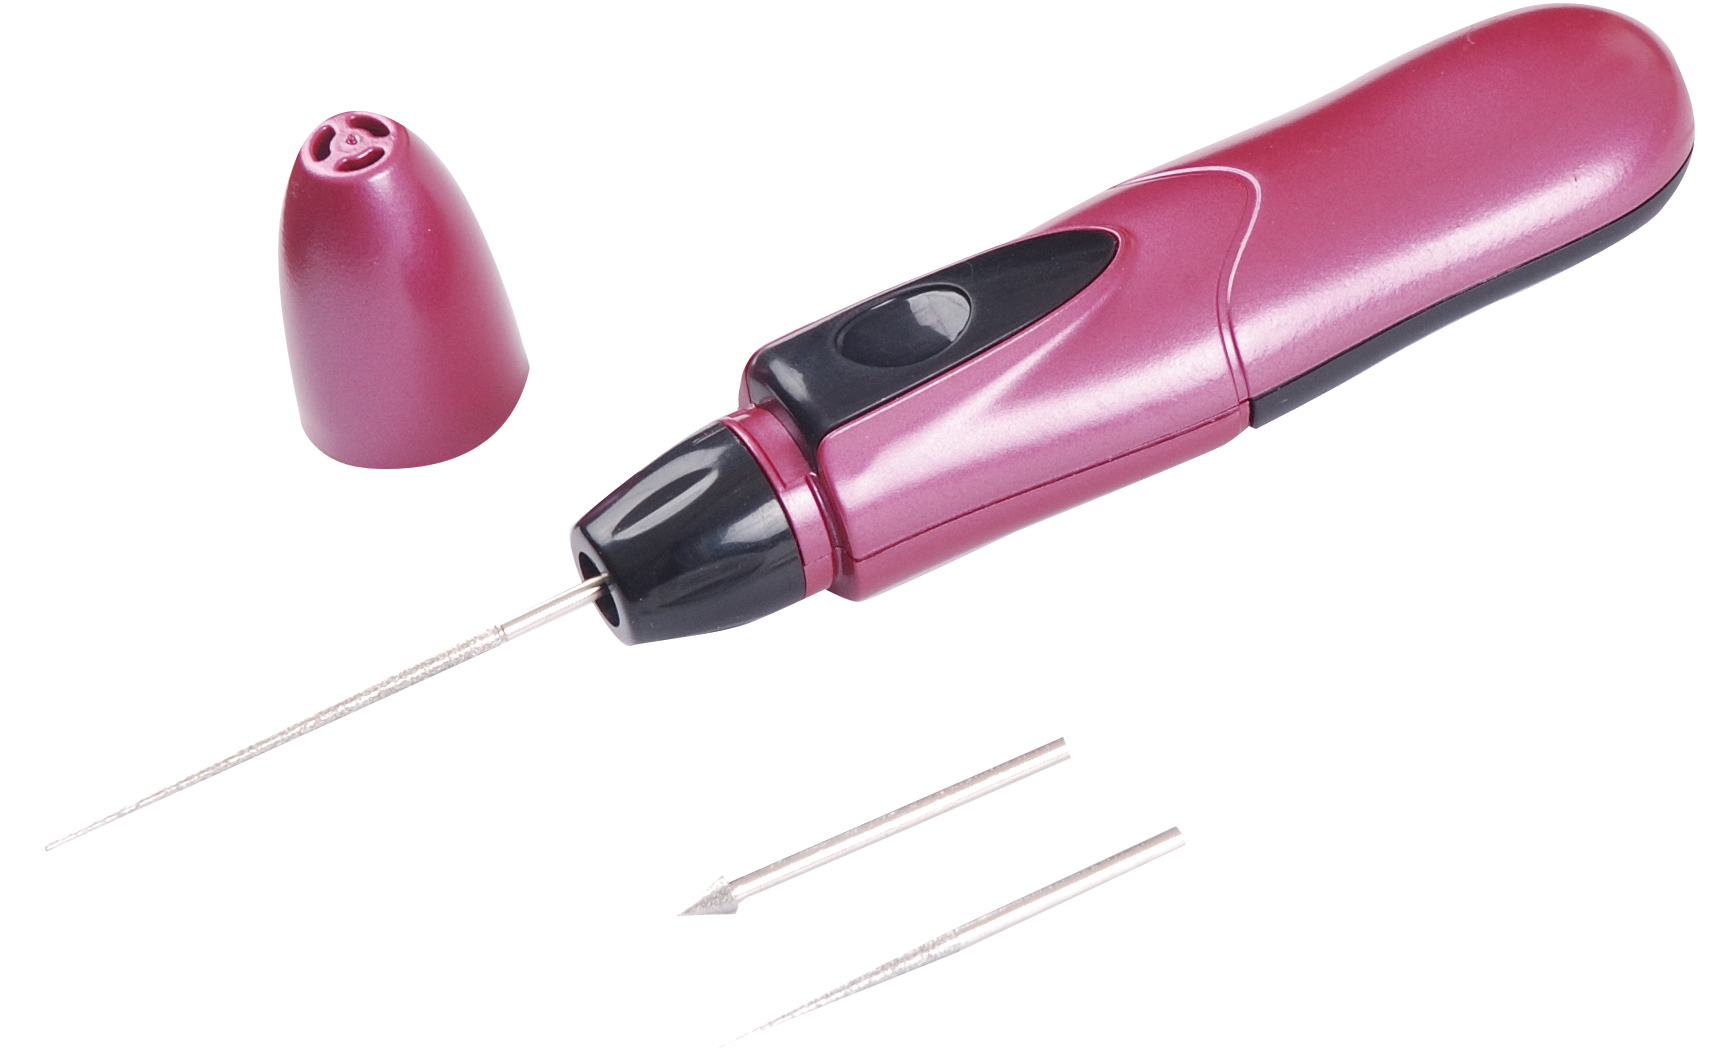 BEAD REAMER, BATTERY OPERATED